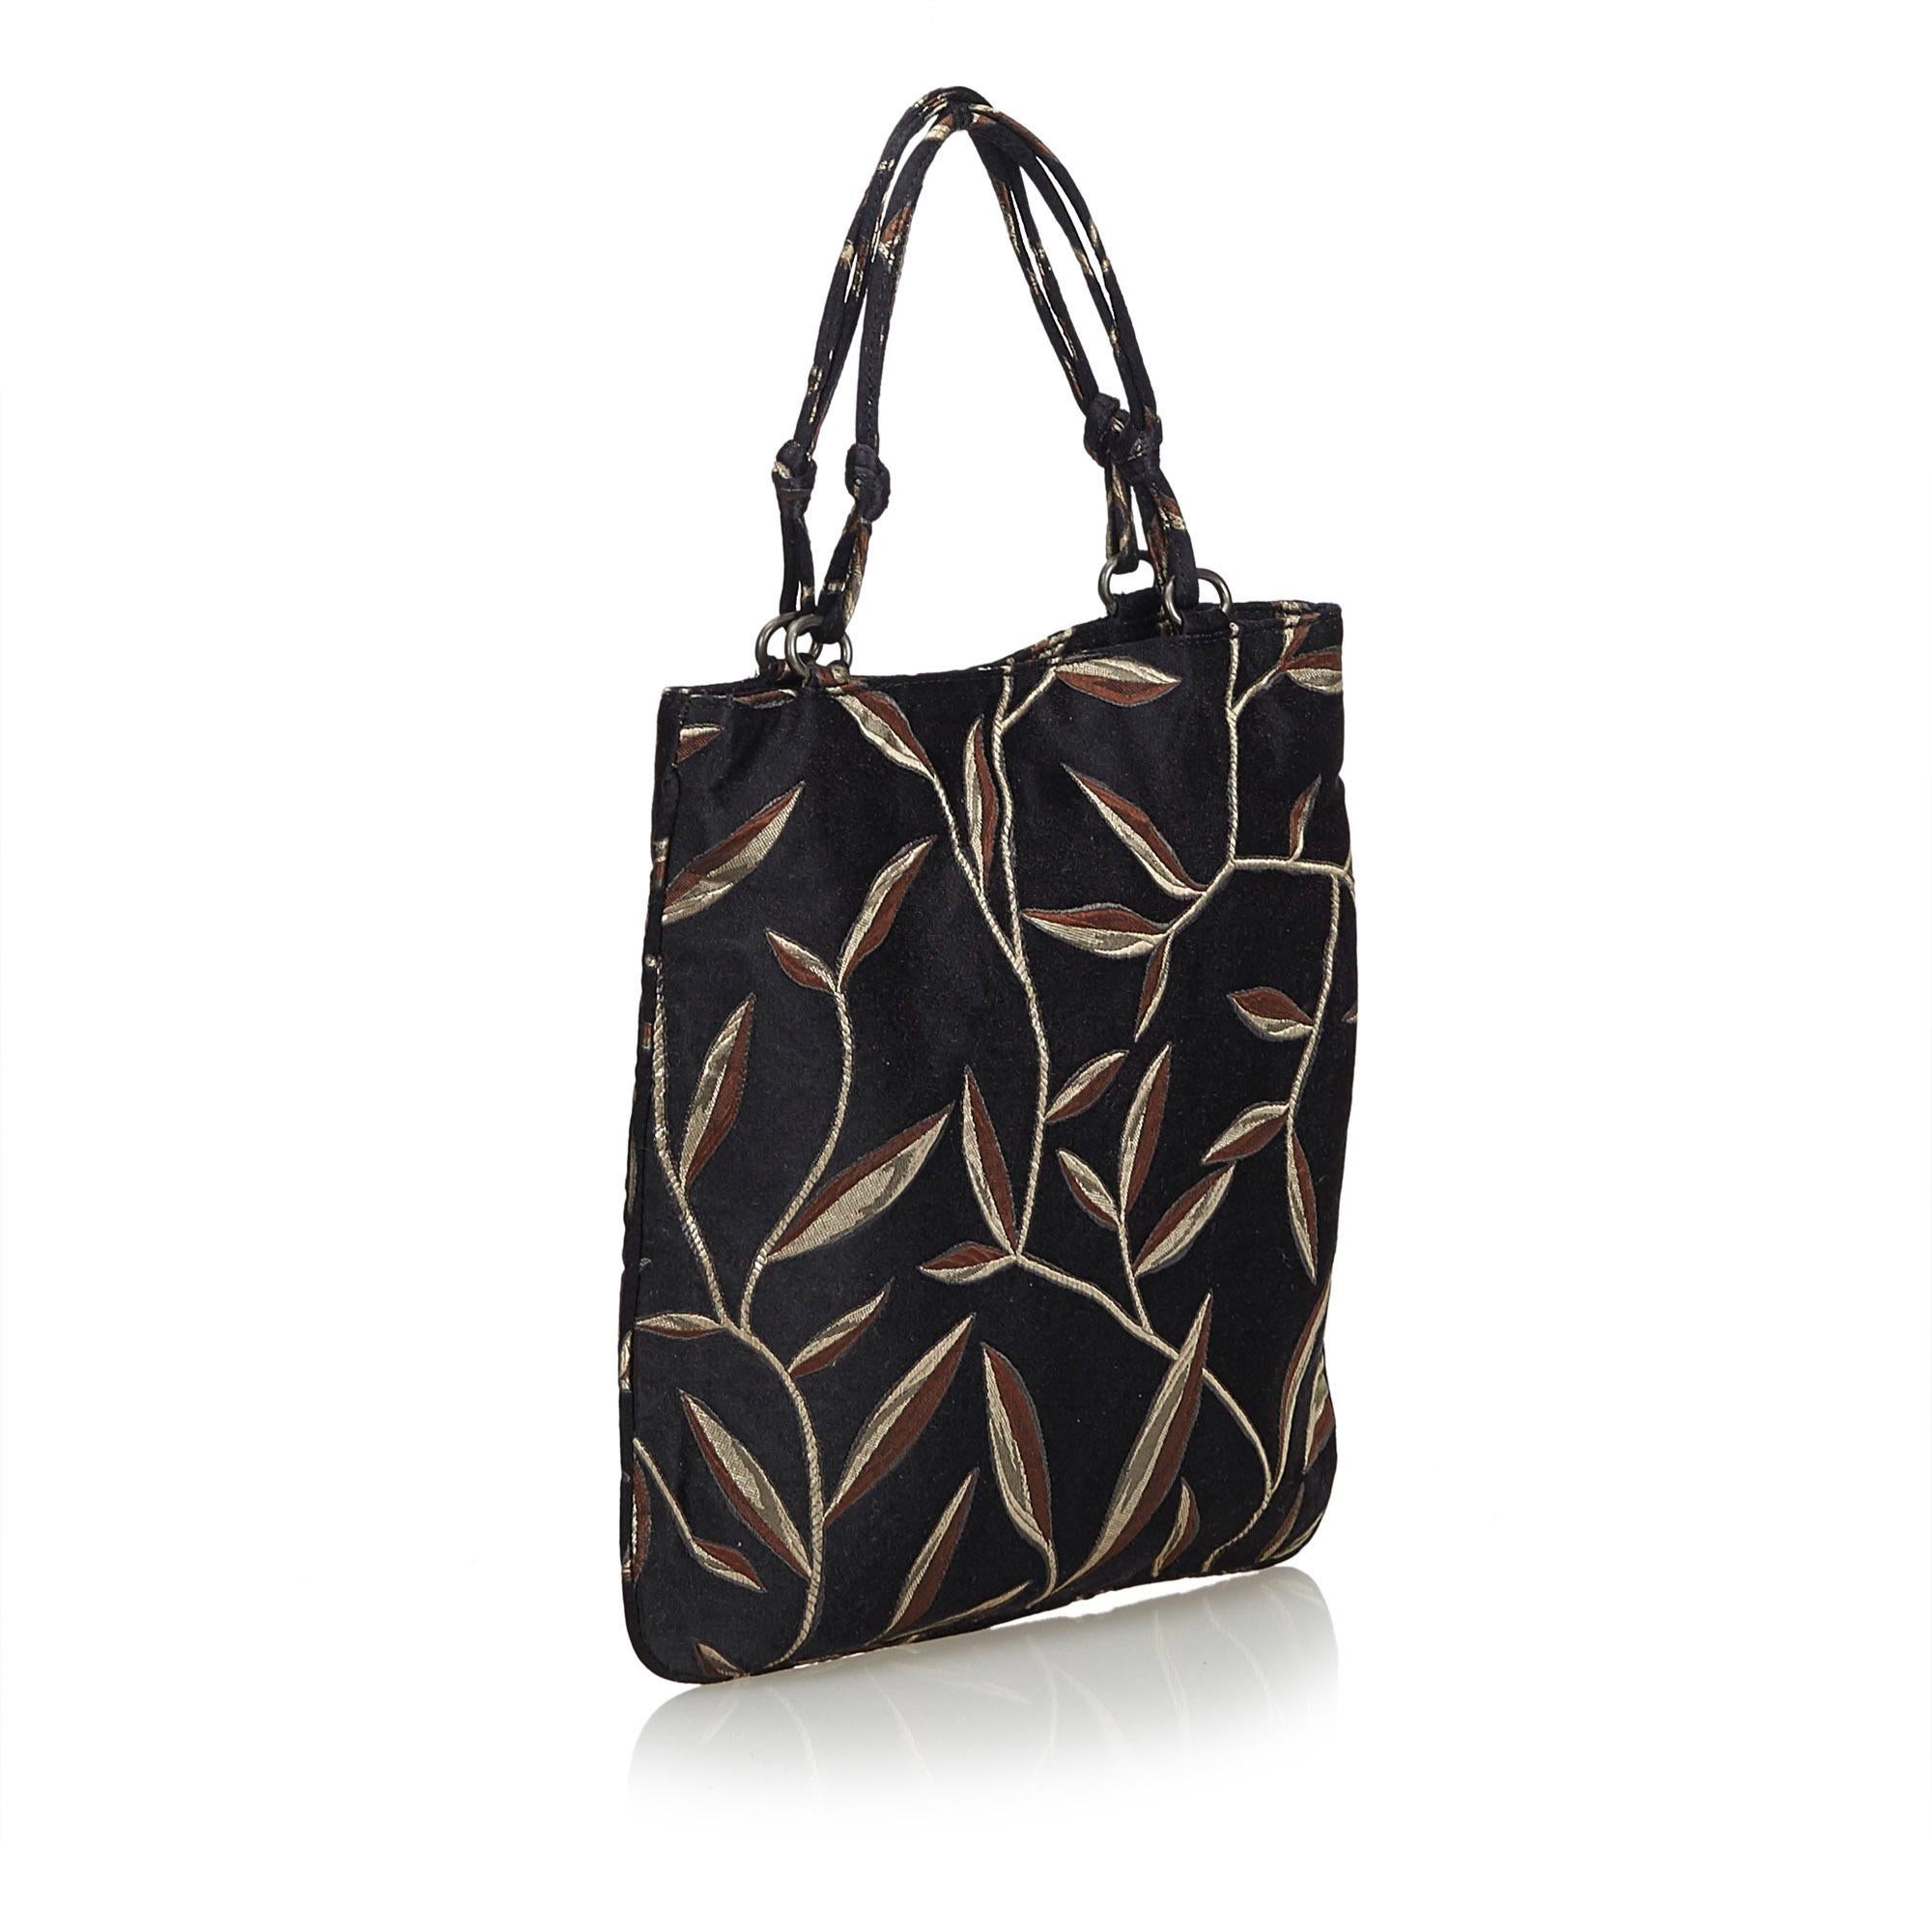 This tote bag features a fabric body, flat straps, and an open top with a push button closure. It carries as AB condition rating.

Inclusions: 
Dust Bag

Dimensions:
Length: 23.00 cm
Width: 23.00 cm
Depth: 1.00 cm
Hand Drop: 11.00 cm
Shoulder Drop: